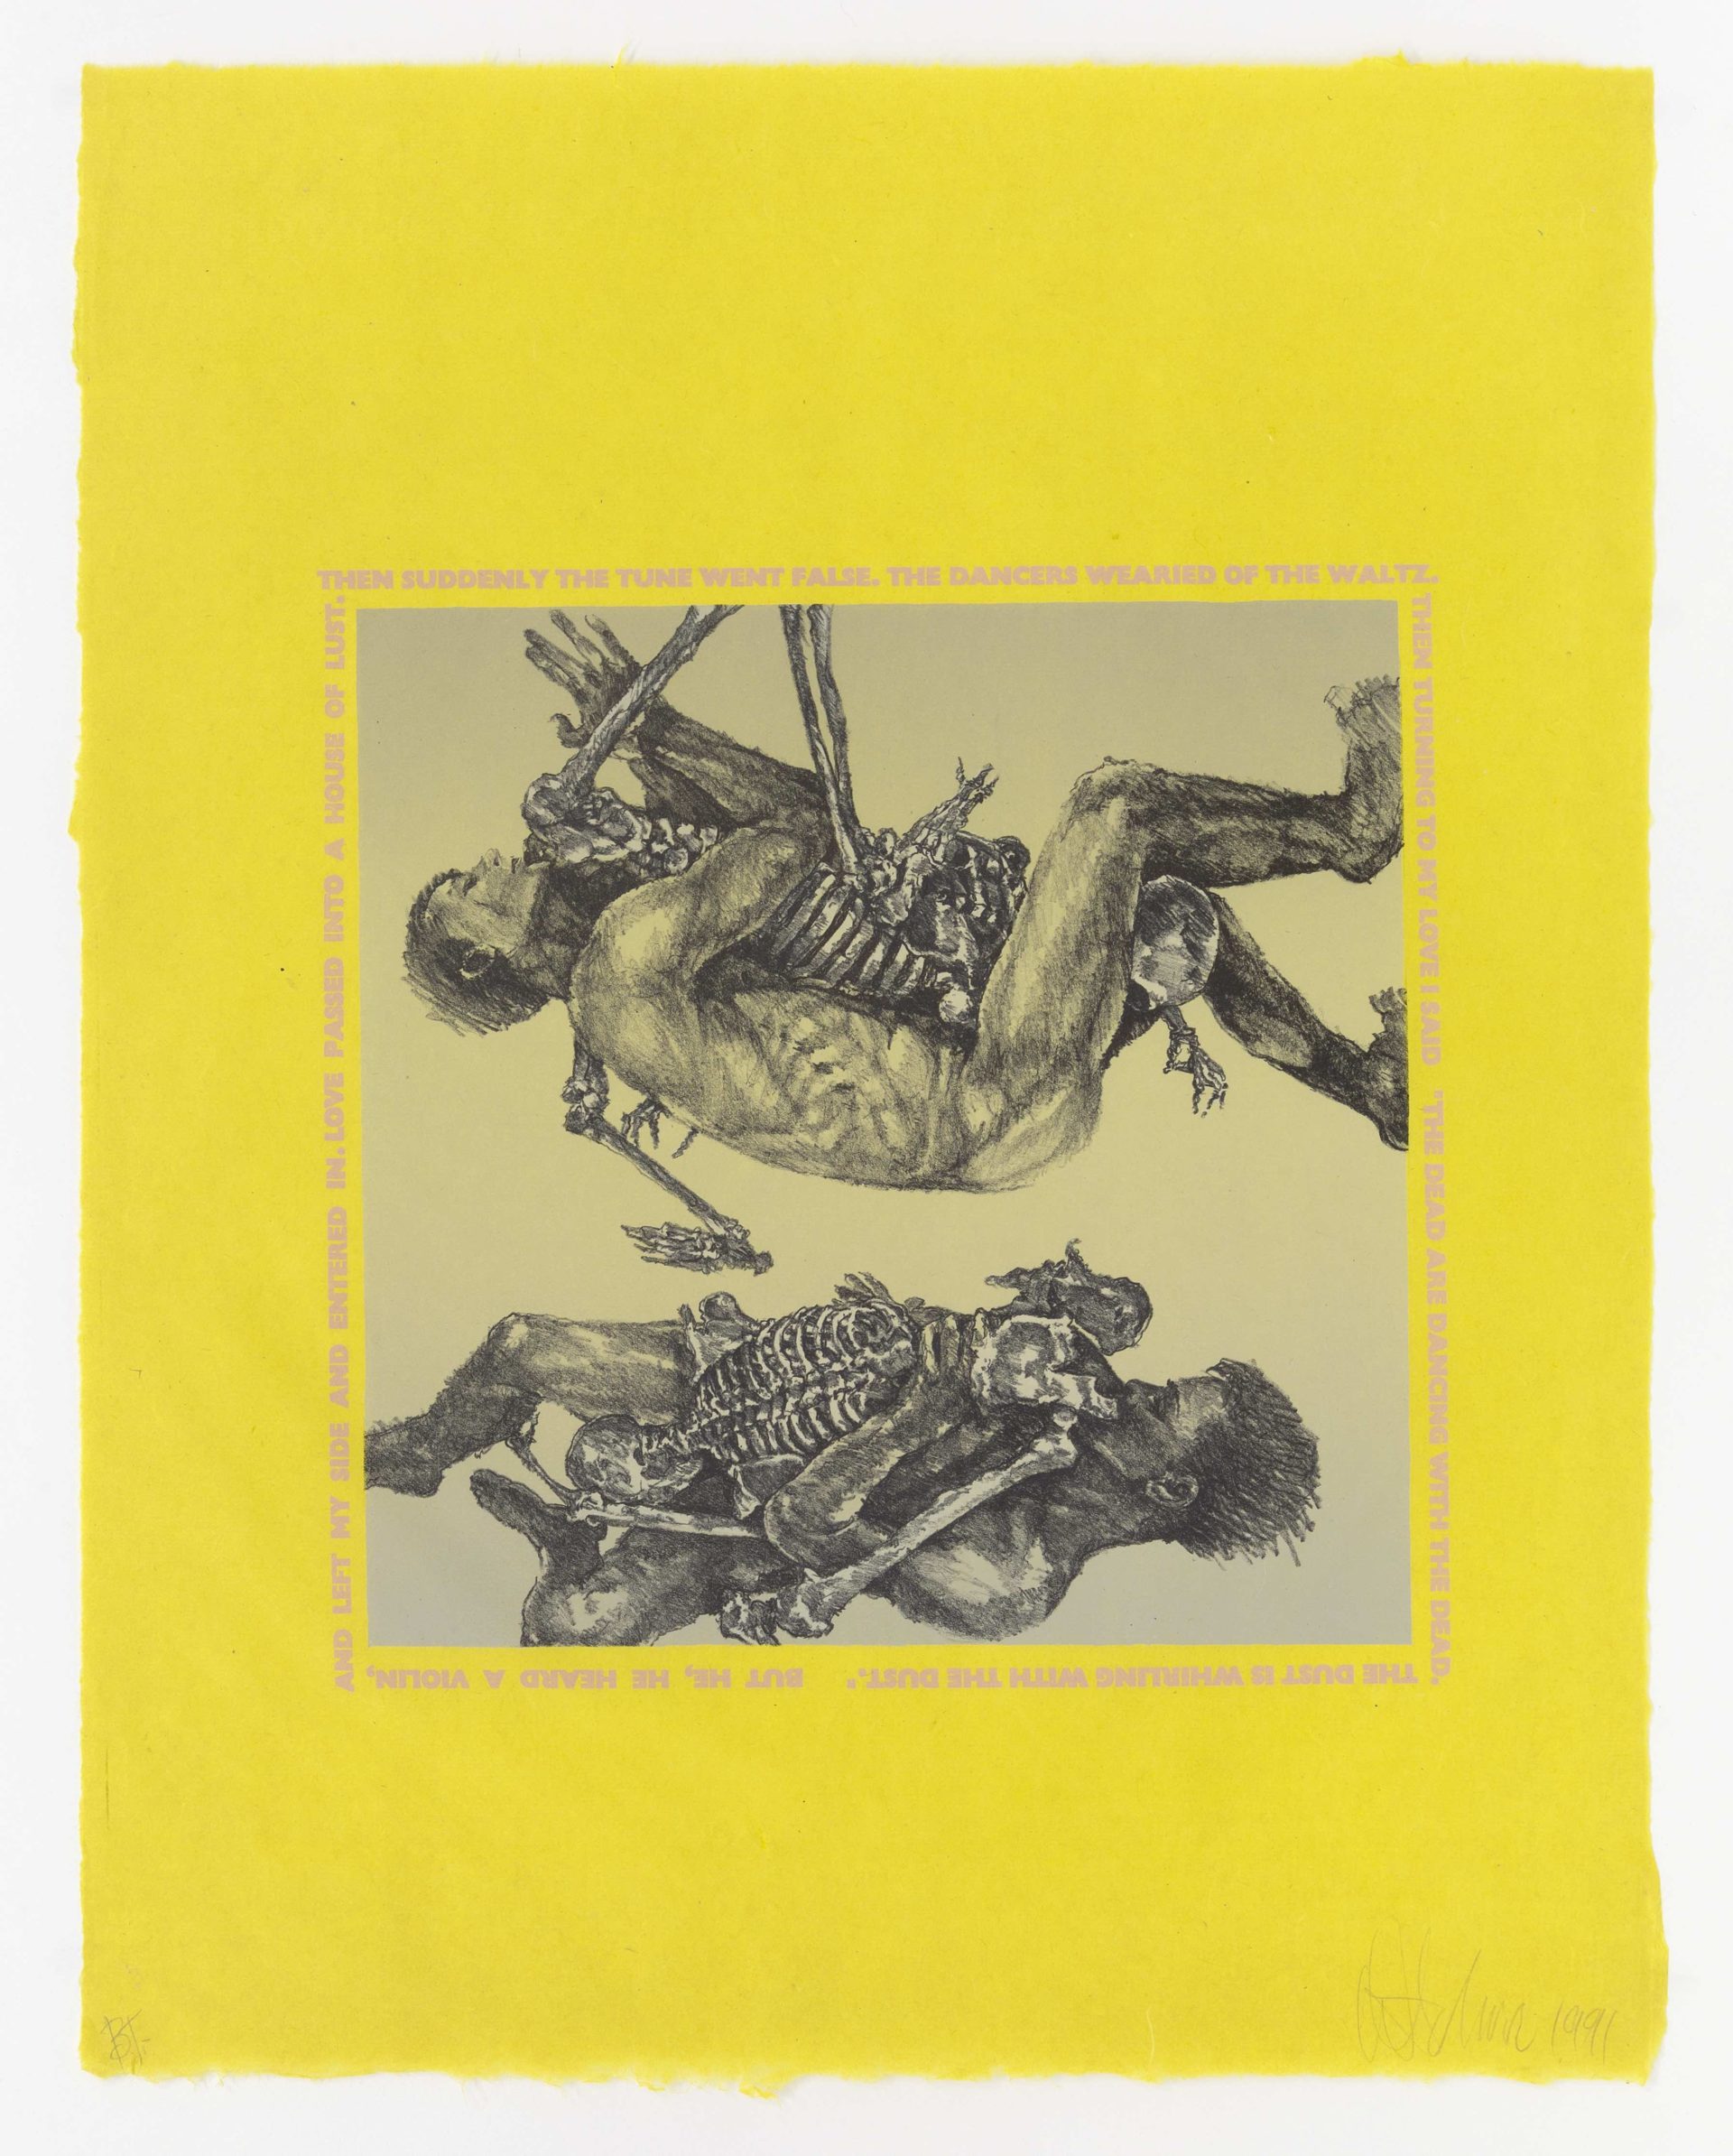 Dance of Death, 1991, Lithograph, 23 x 18 inches (58.4 x 45.7 cm), Edition of 18